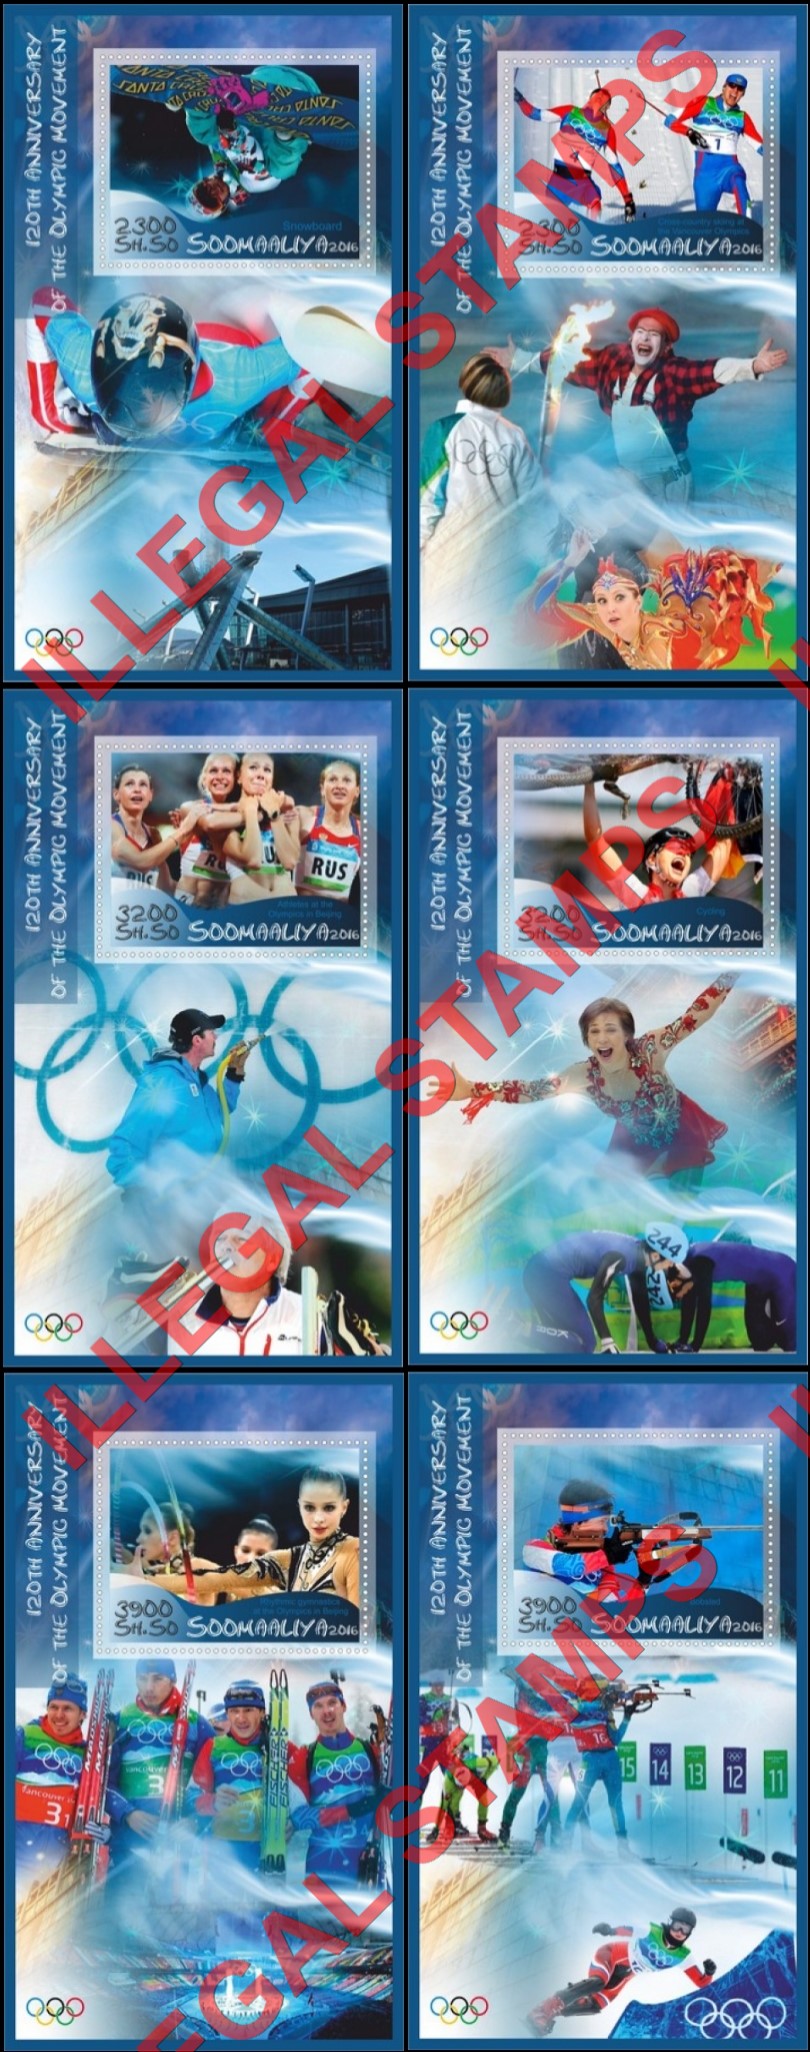 Somalia 2016 Olympic Movement Illegal Stamp Souvenir Sheets of 1